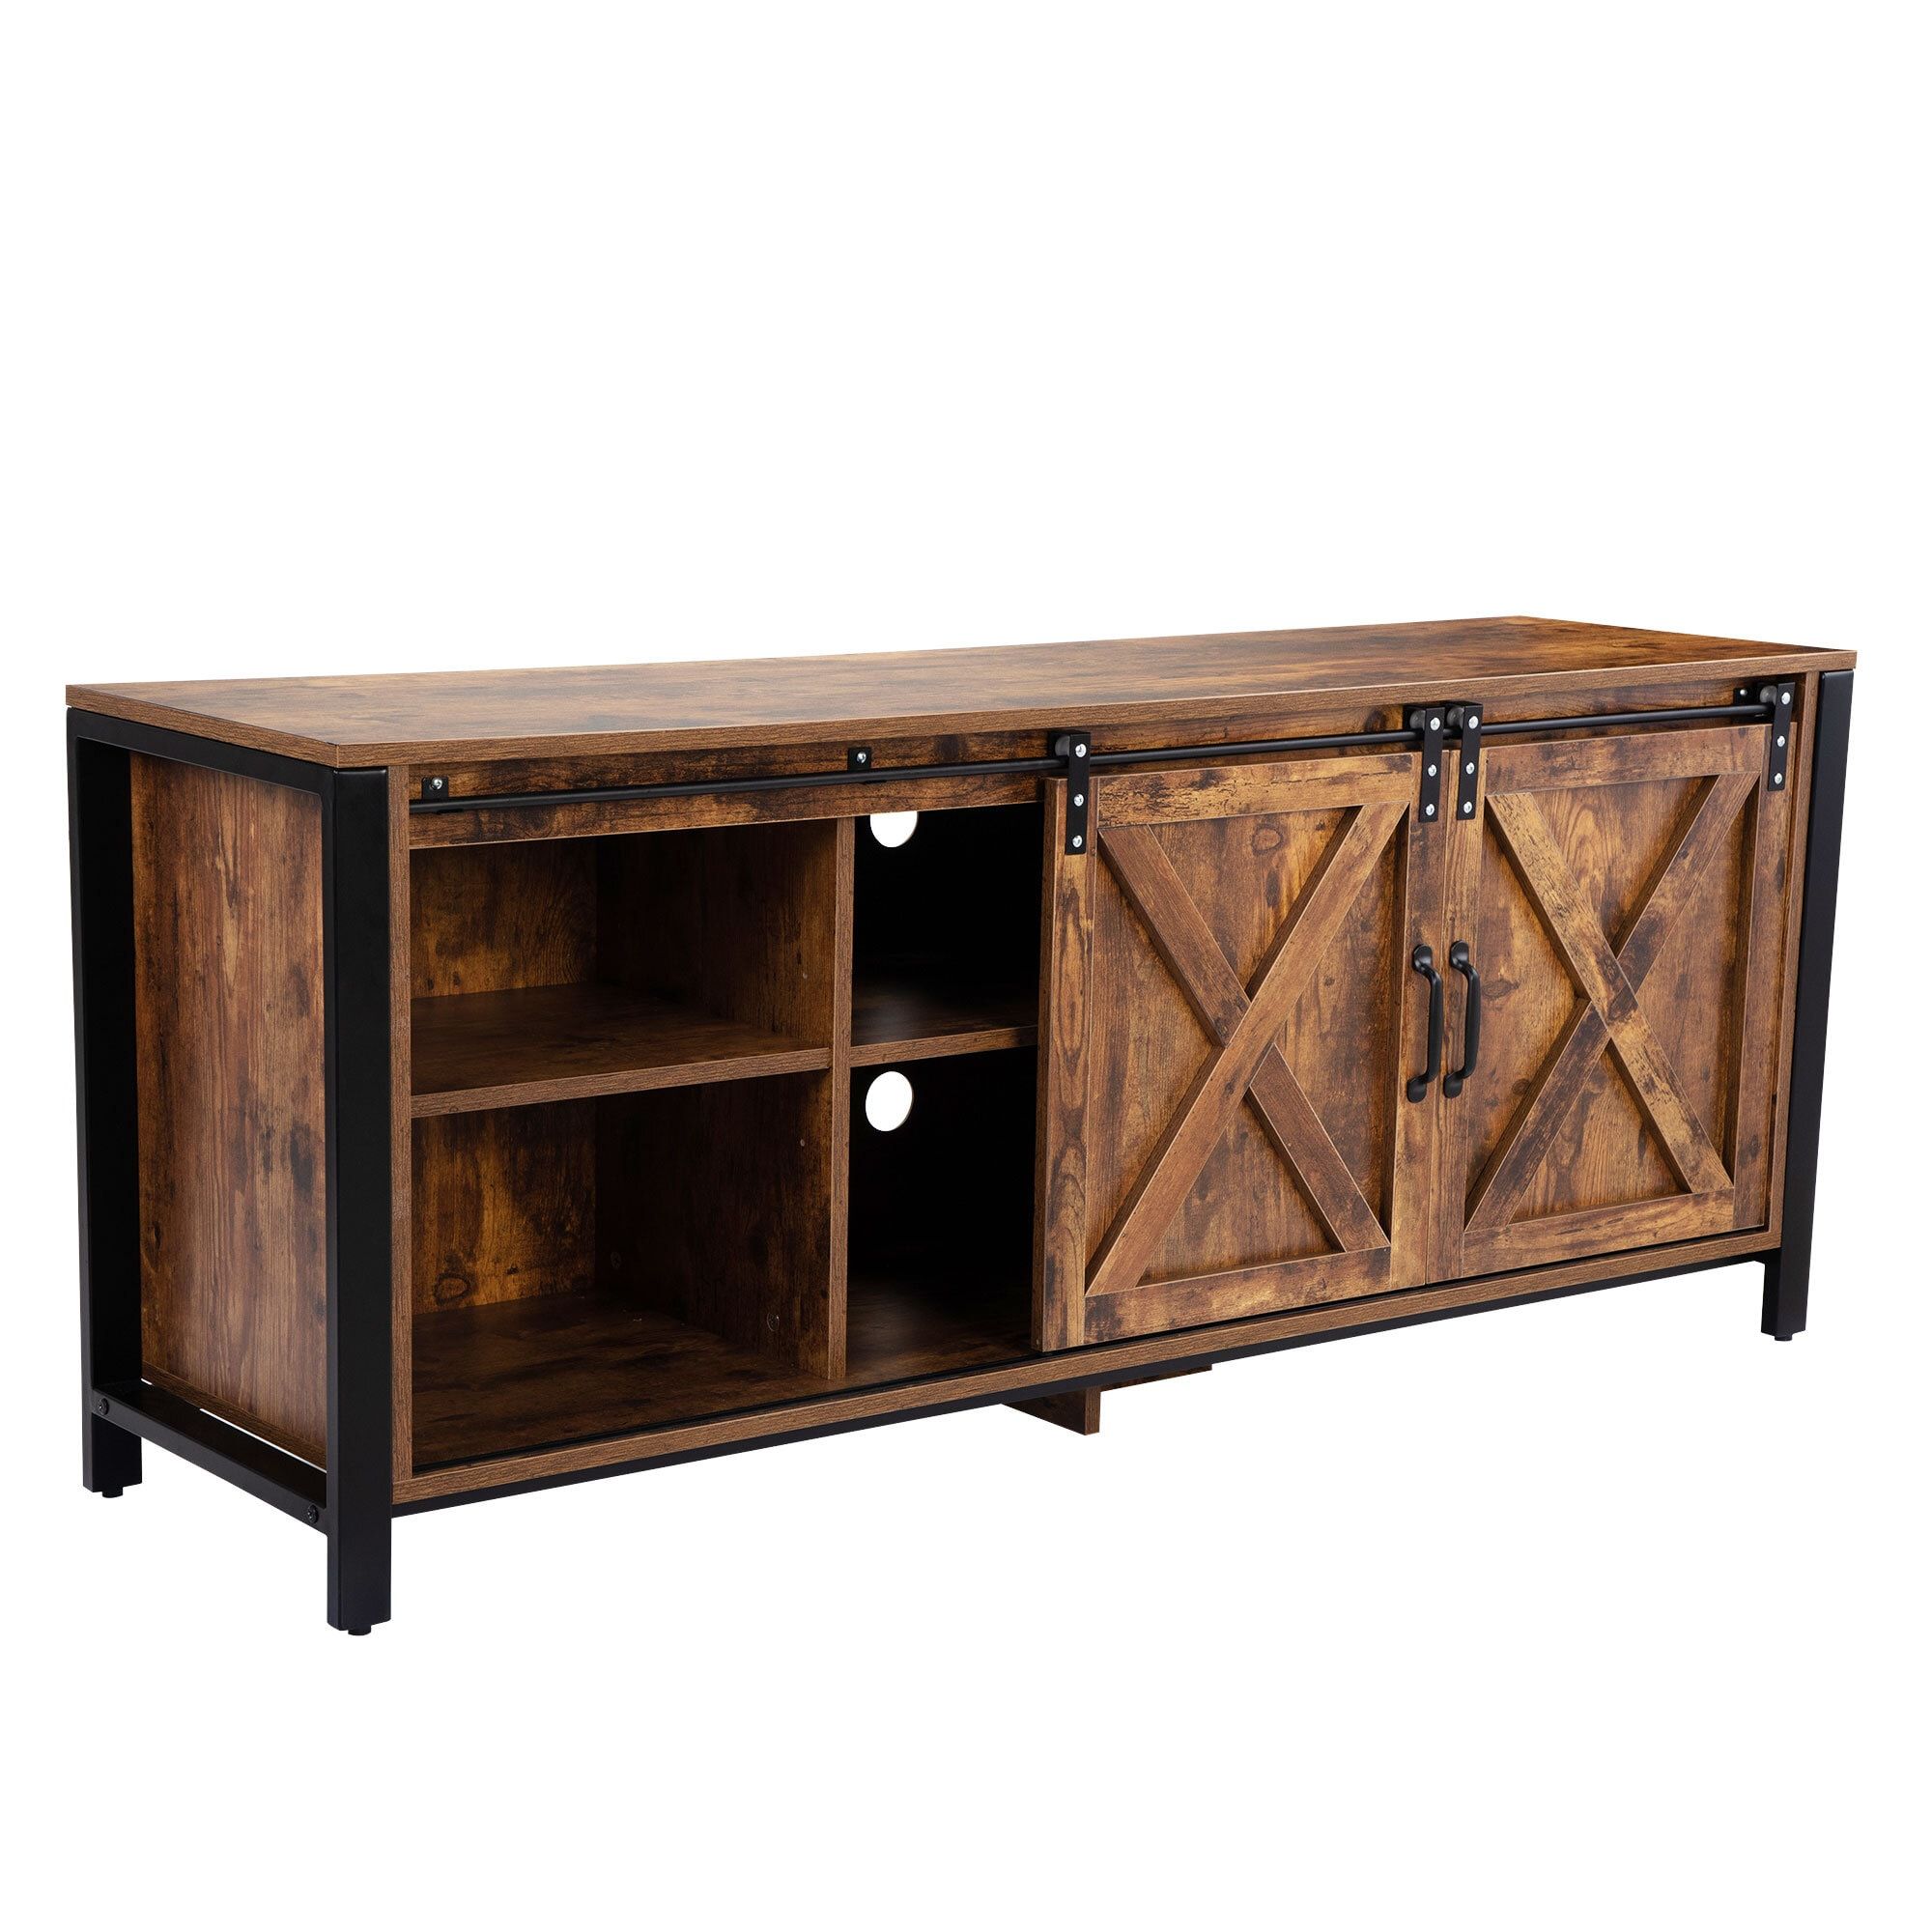 Afoxsos Farmhouse Tv Stand For Tvs Up To 65 In With Sliding Barn Doors And  Adjustable Shelves, Rustic Brown In The Tv Stands Department At Lowes Throughout Barn Door Media Tv Stands (View 12 of 15)